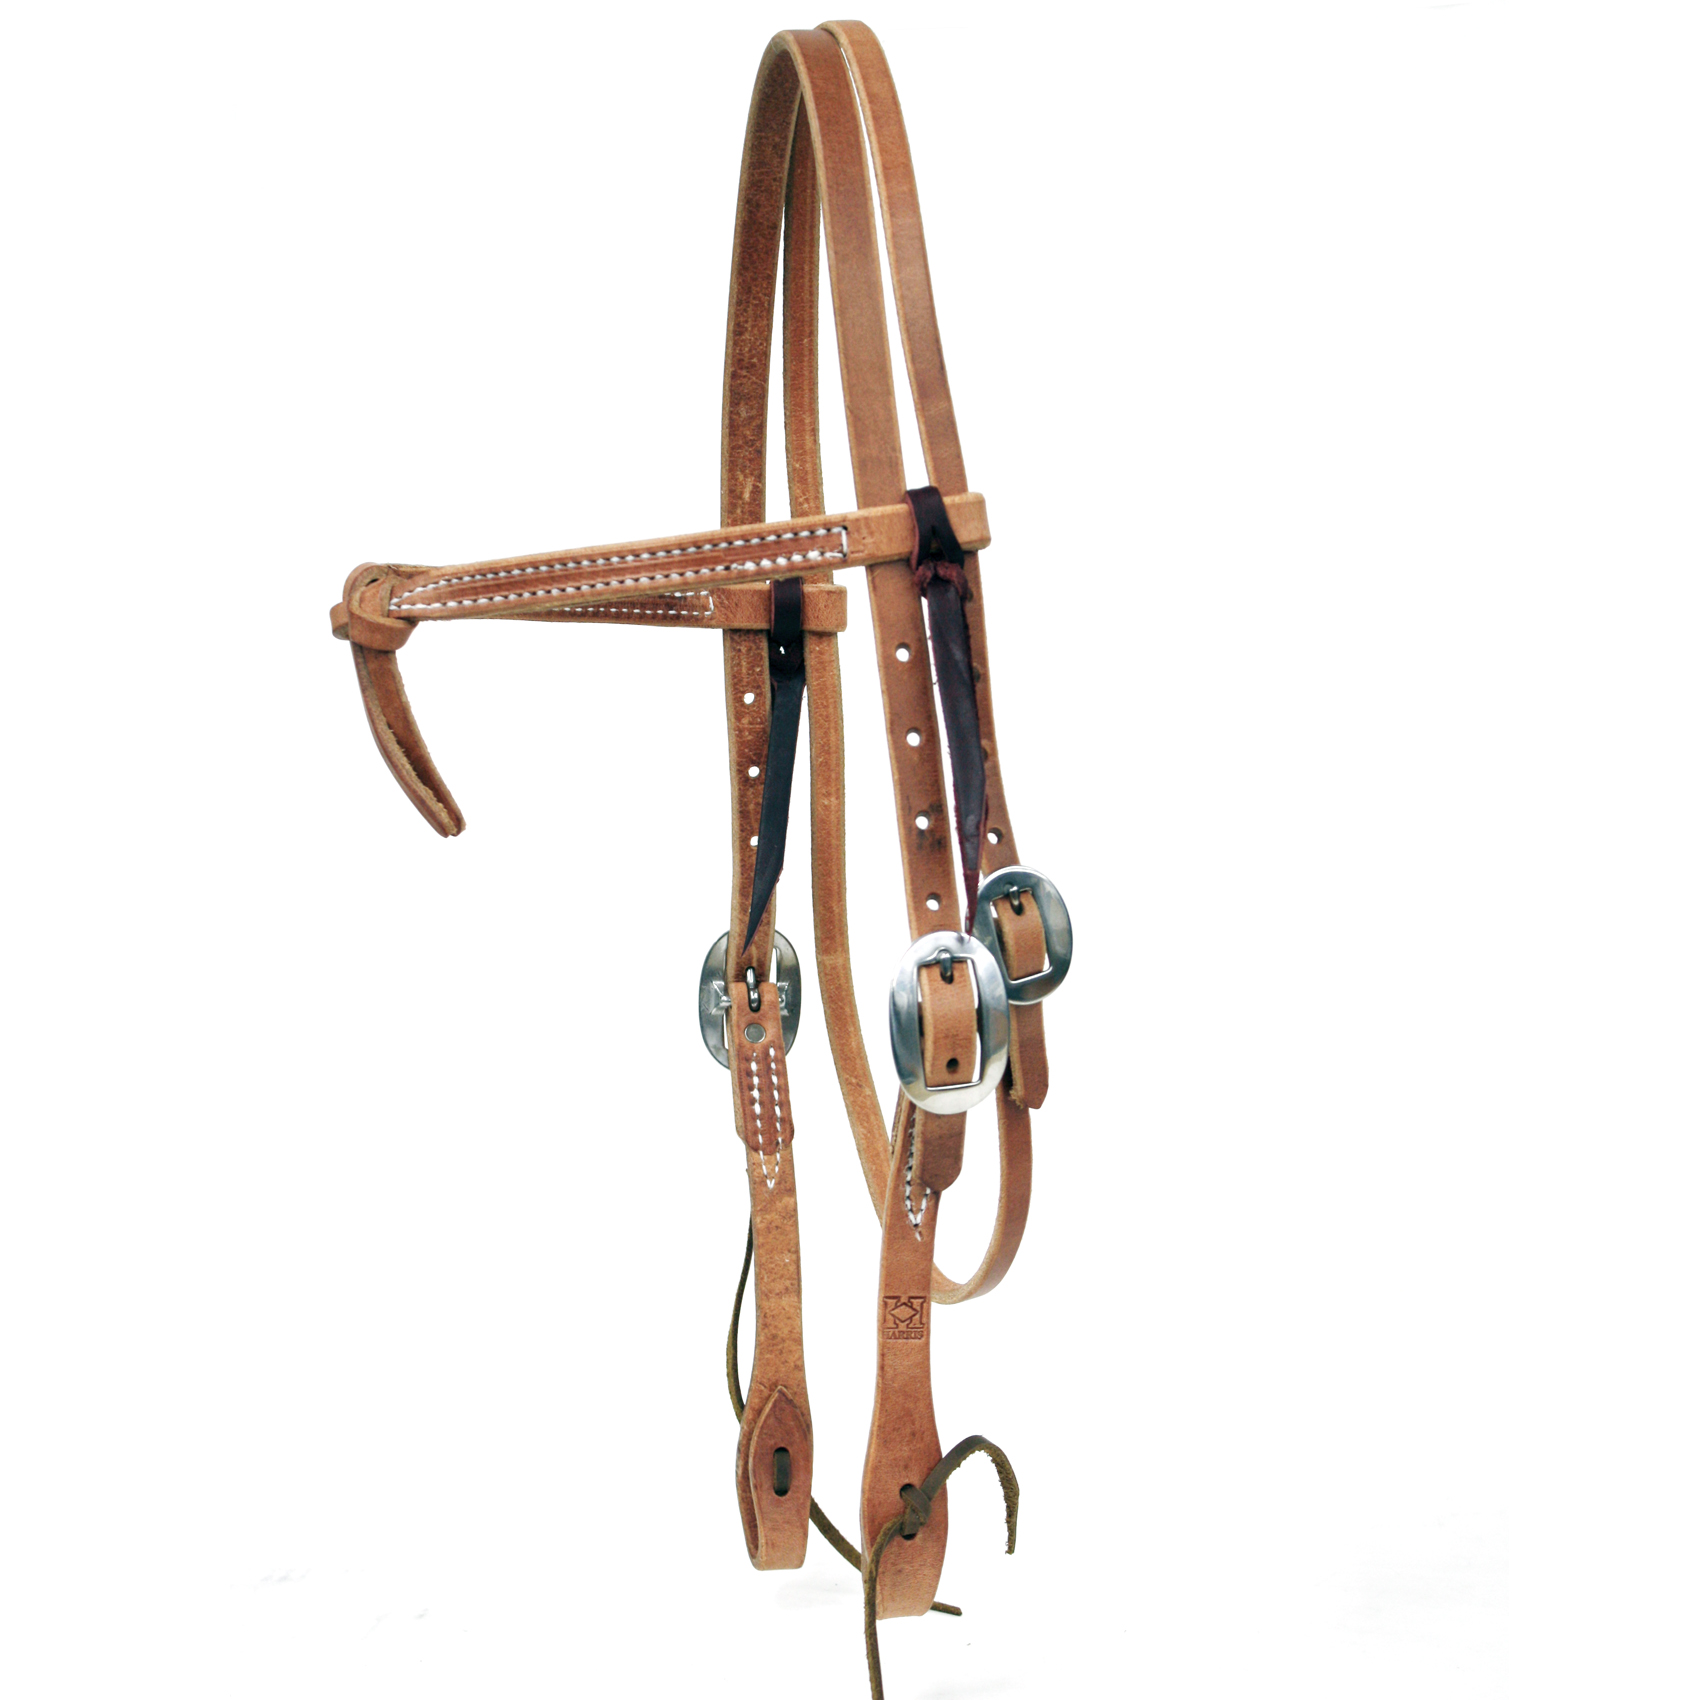 Western Leather Headstall/BRIDLE Studs Design Knot Brow band Browband 